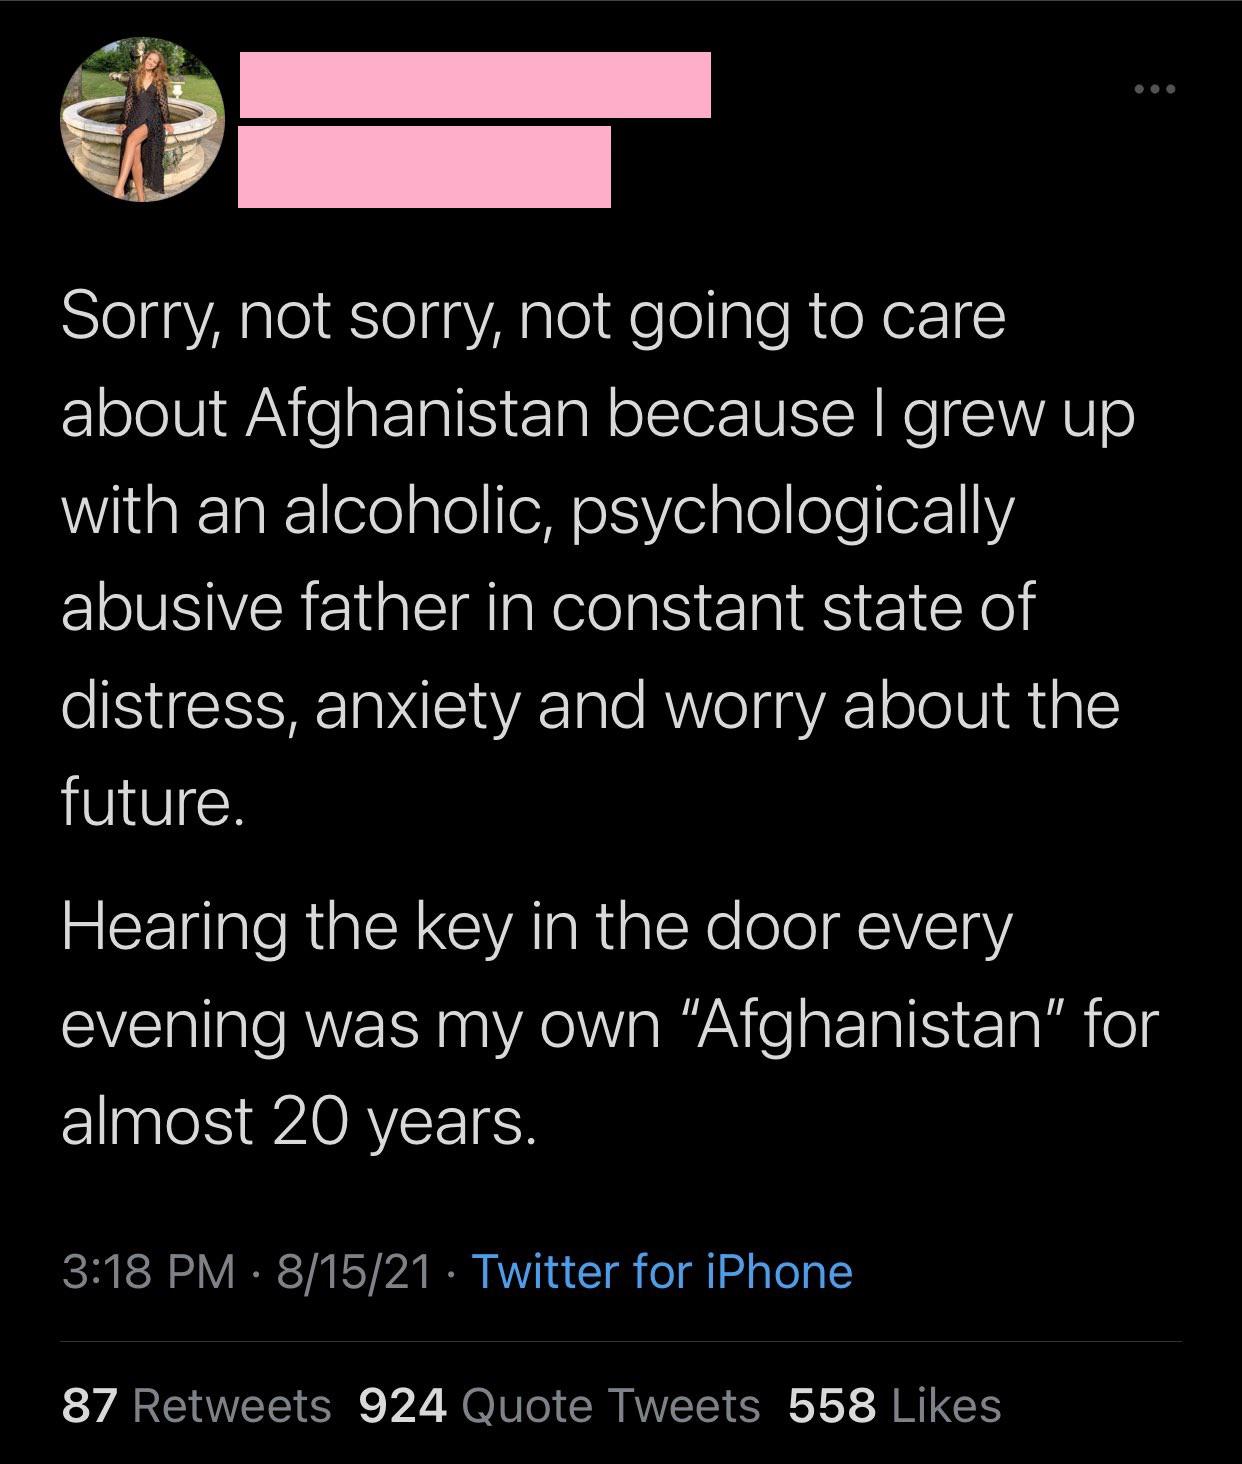 screenshot - Sorry, not sorry, not going to care about Afghanistan because I grew up with an alcoholic, psychologically abusive father in constant state of distress, anxiety and worry about the future. Hearing the key in the door every evening was my own 